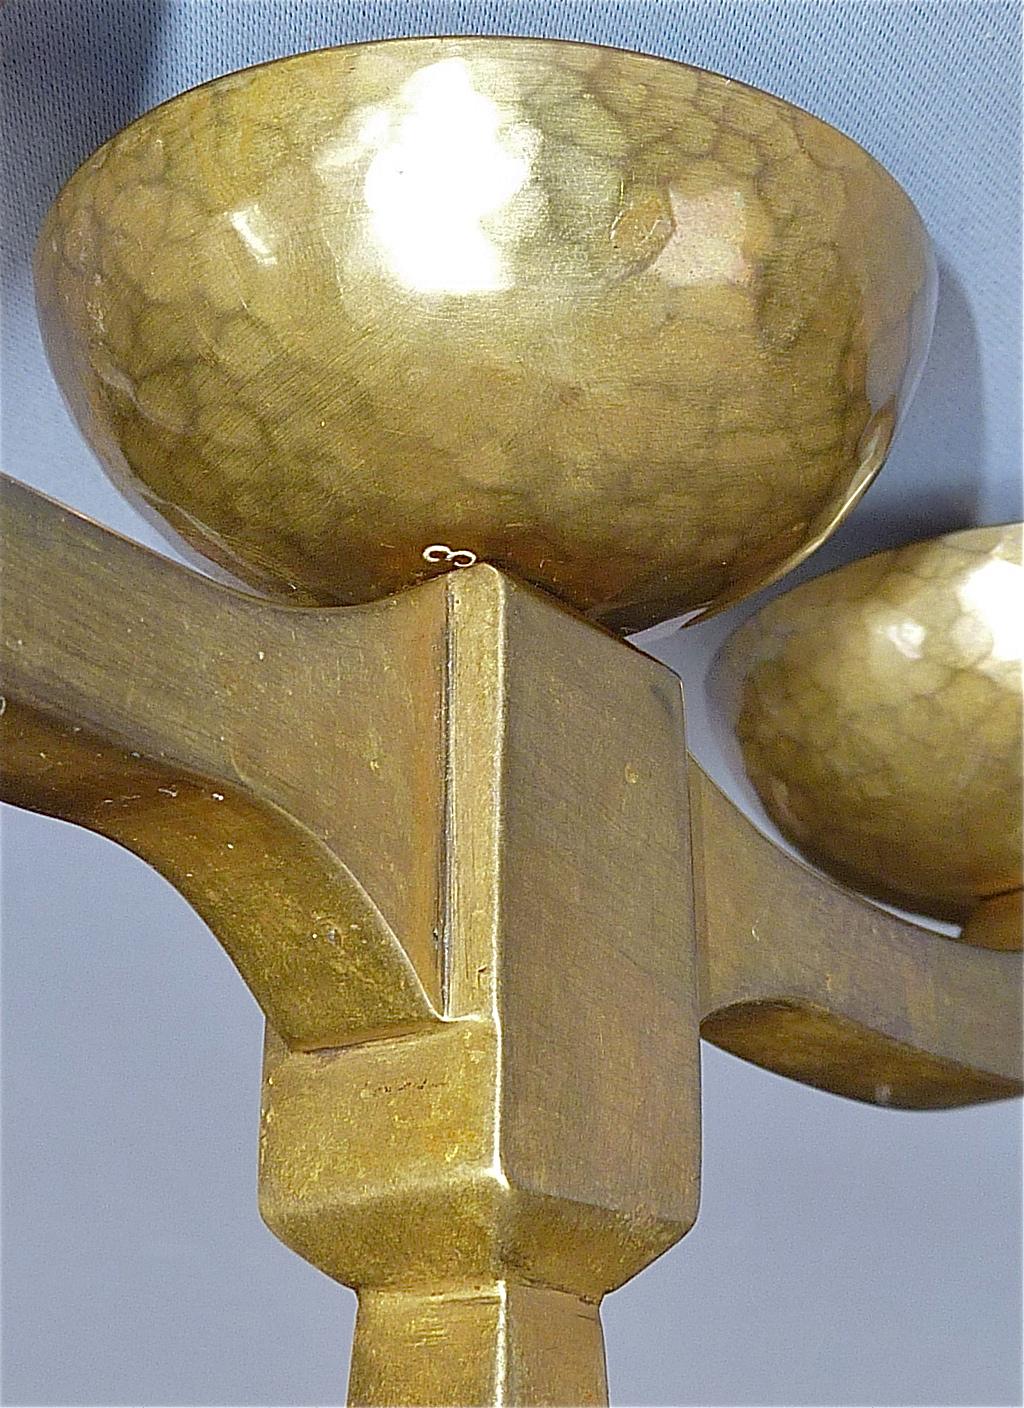 Hand-Crafted Hand-Chased Brass Bauhaus Art Deco Candle Holder Signed Bohde 1920s Candelabras For Sale